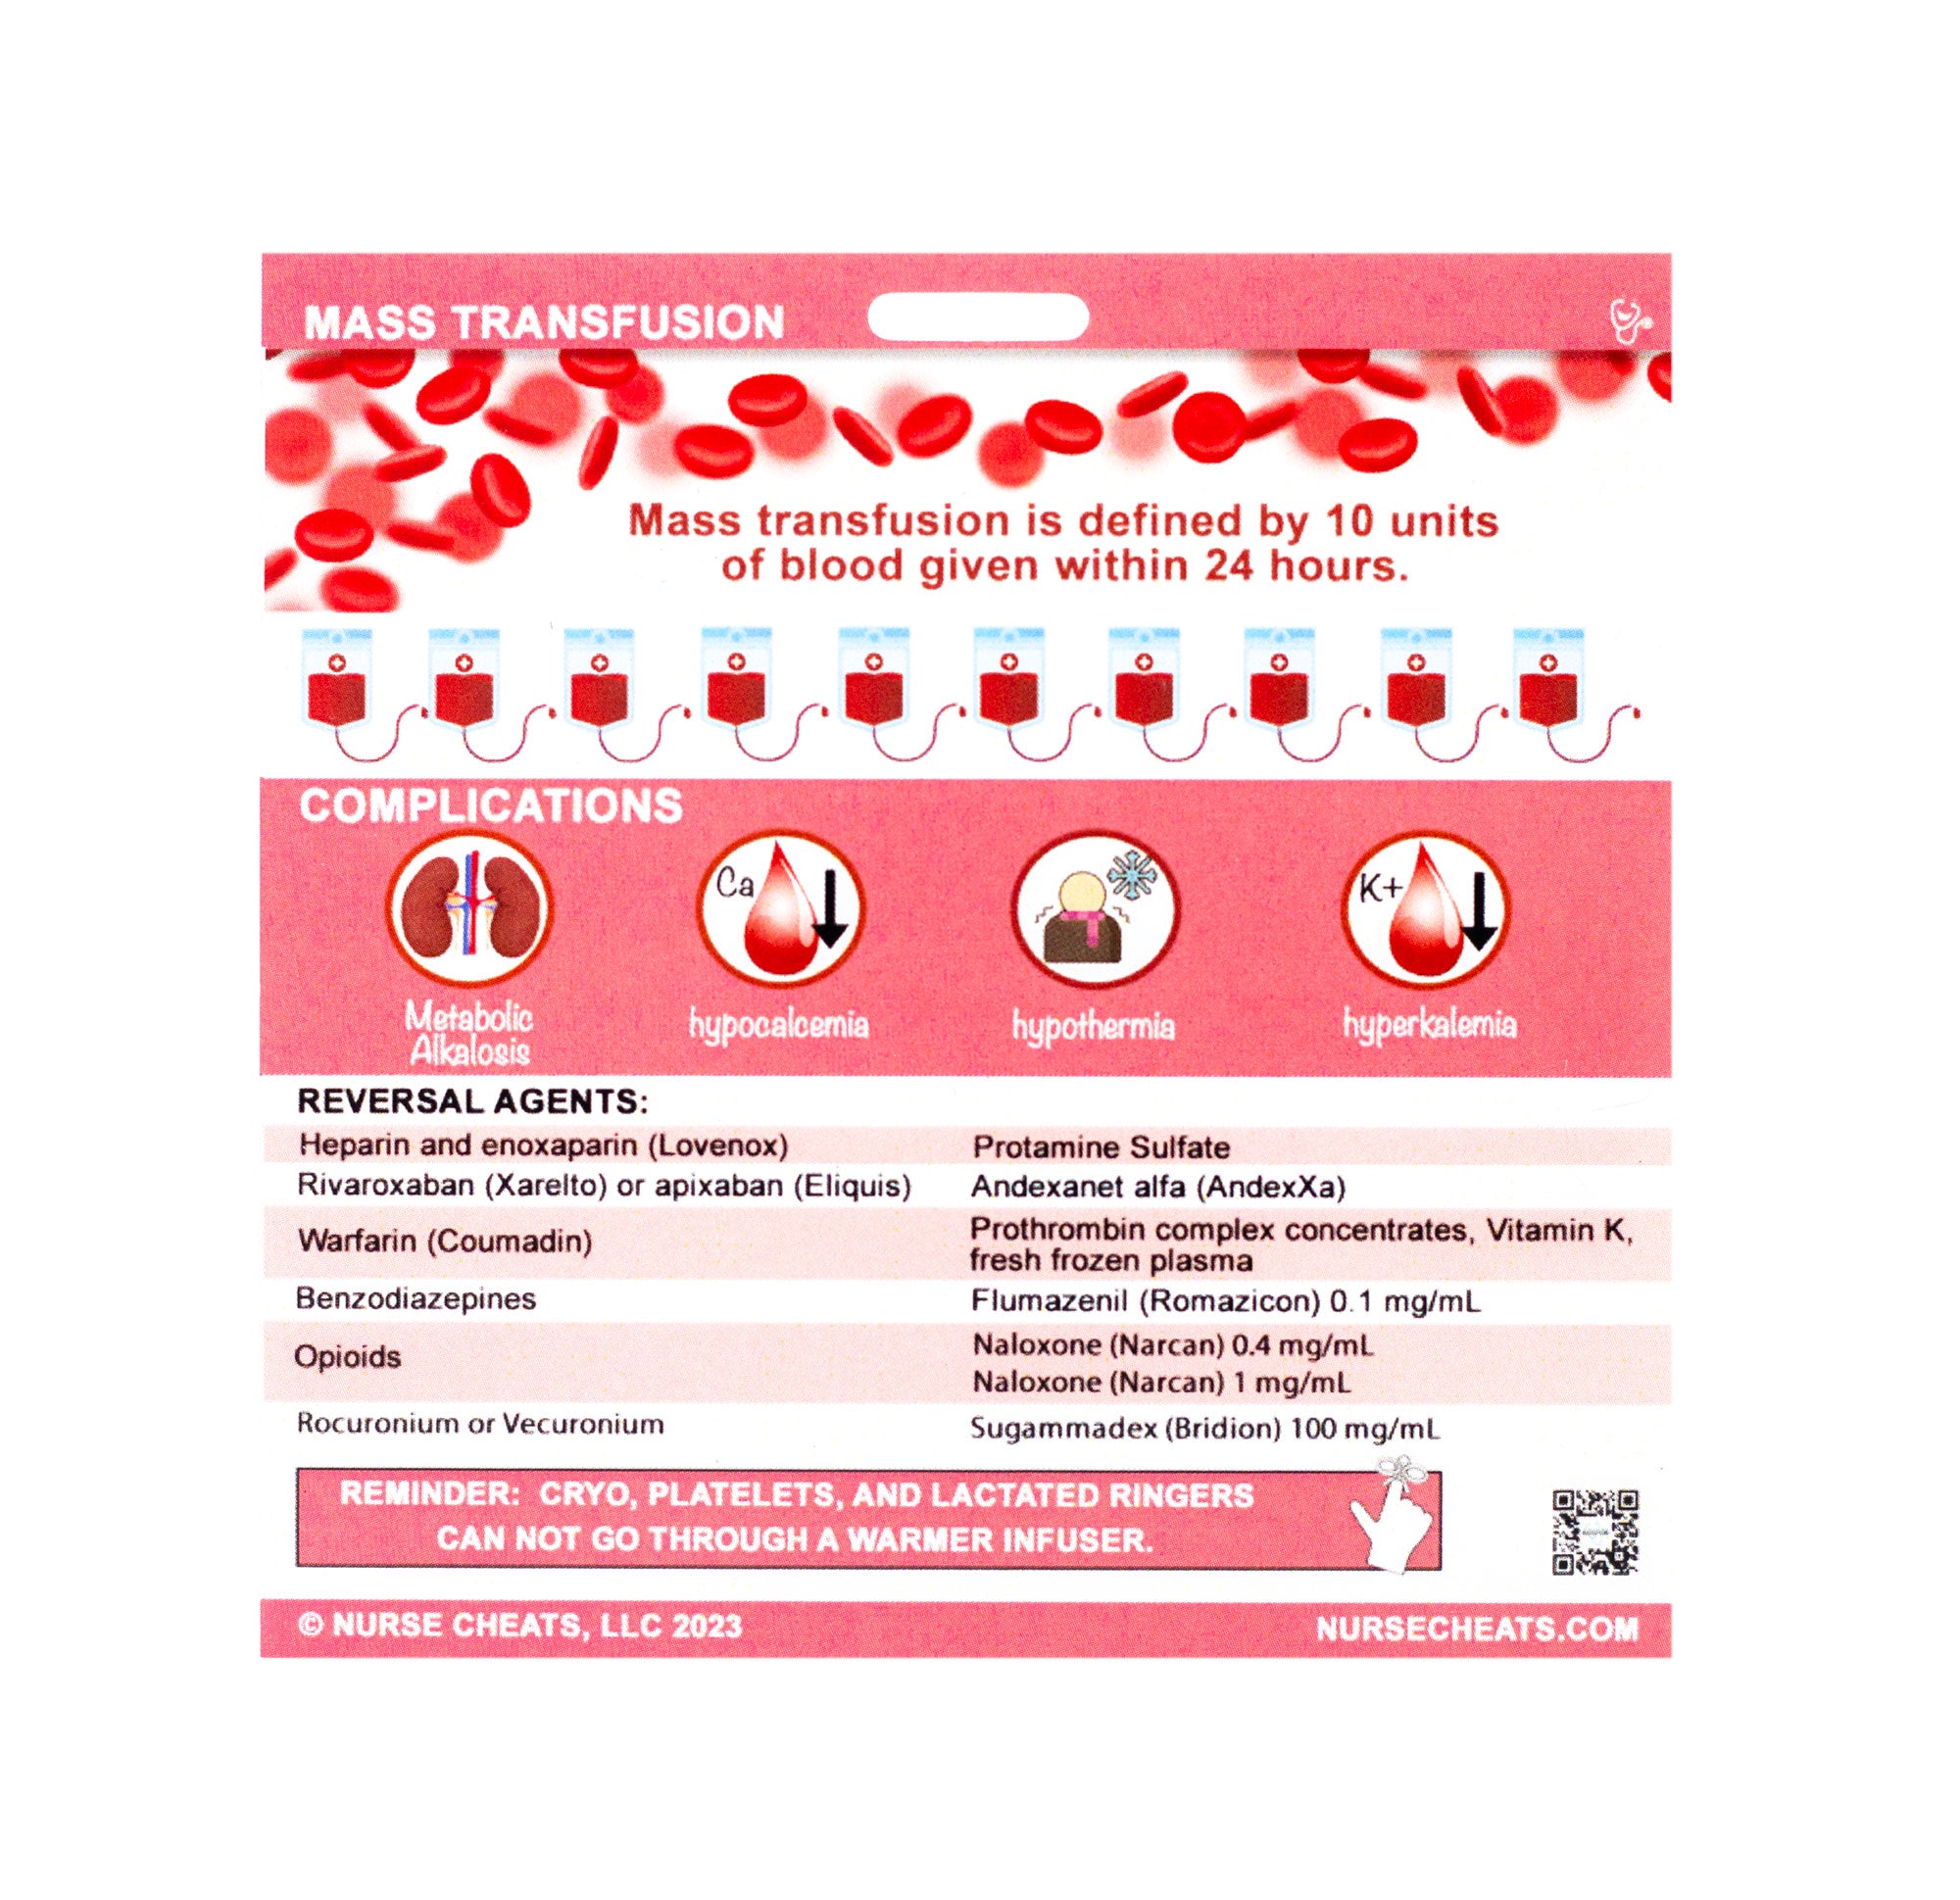 This Mass Transfusion Protocol badge is invaluable for trauma nurses.&nbsp; Contains information related to Mass Transfusion protocol for traumas.&nbsp; Includes protocols, reversal agents, and more. <meta charset="utf-8">Our Mass Transfusion protocol badge is perfect for new trauma nurses.